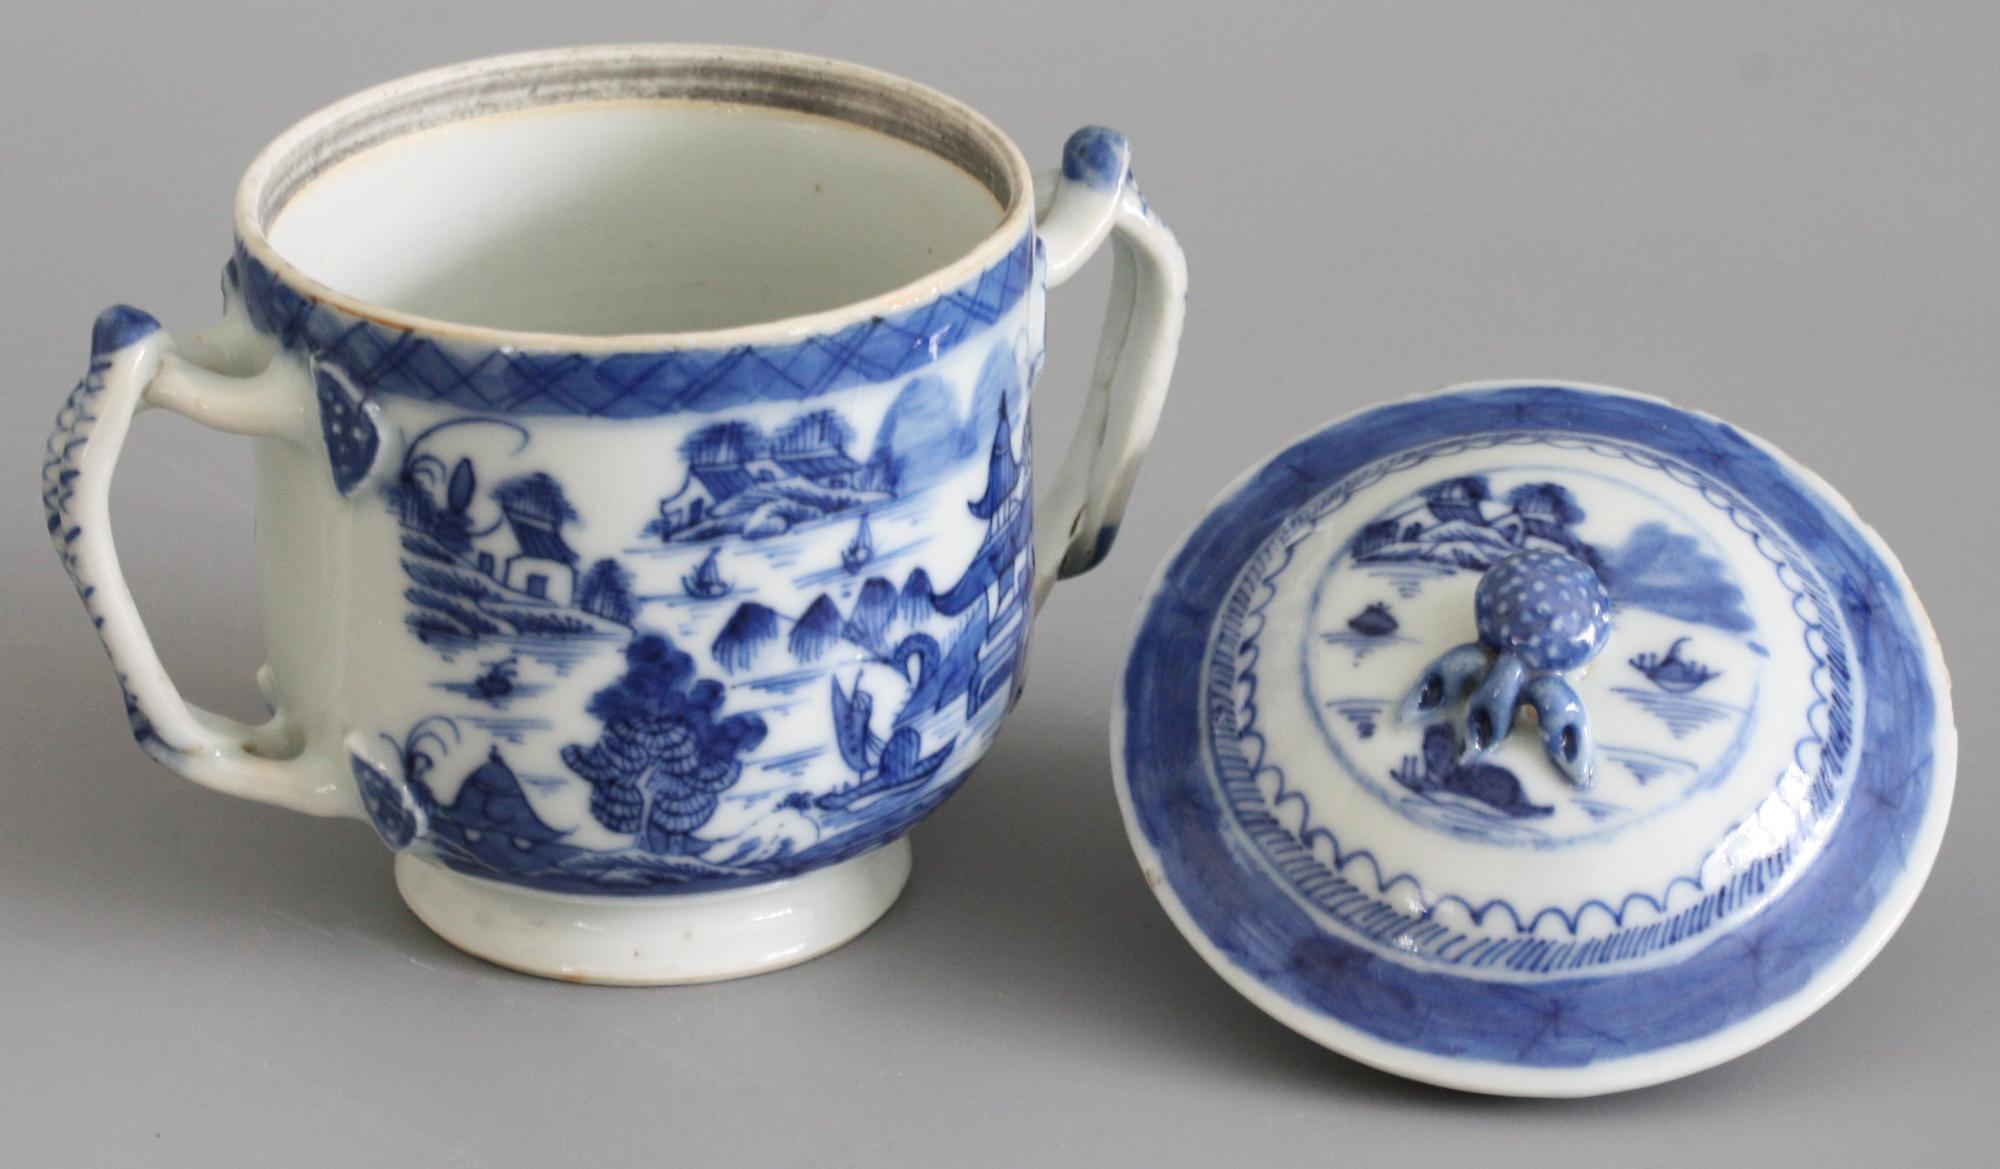 A fine antique Chinese Qianlong style porcelain twin handled lidded blue and white watery landscape painted cup probably dating to the 18th or possibly early 19th century. The cup stands raised on a narrow rounded foot with a cut and unglazed foot